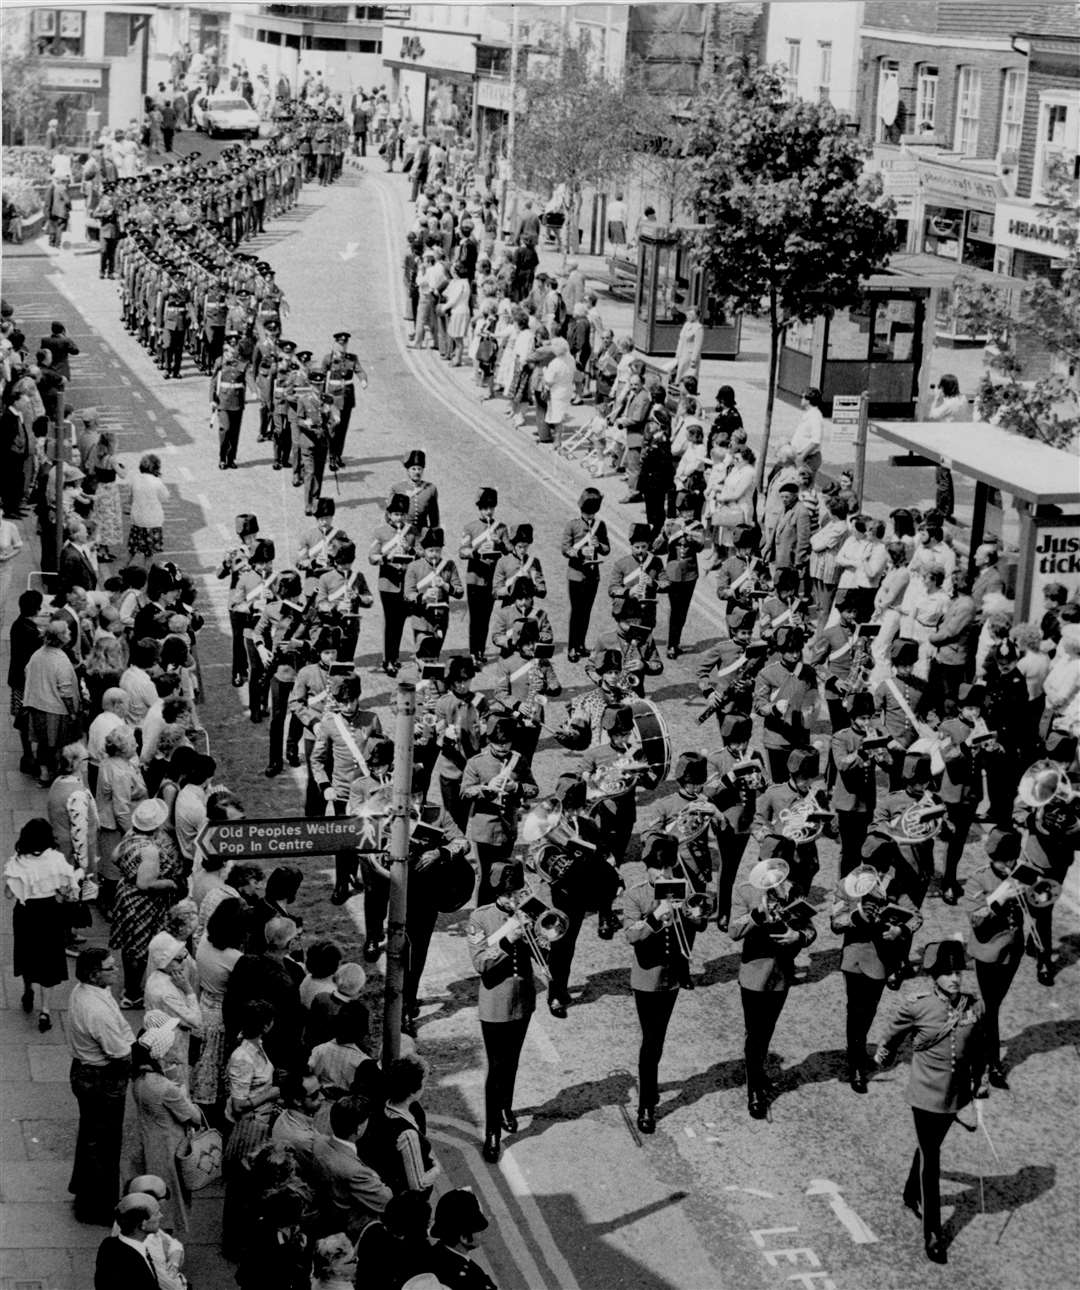 The Intelligence Corps received the Freedom of the Borough of Ashford on May 16, 1979, and then marched through Ashford High Street with bayonets fixed, led by the Band of the Royal Engineers